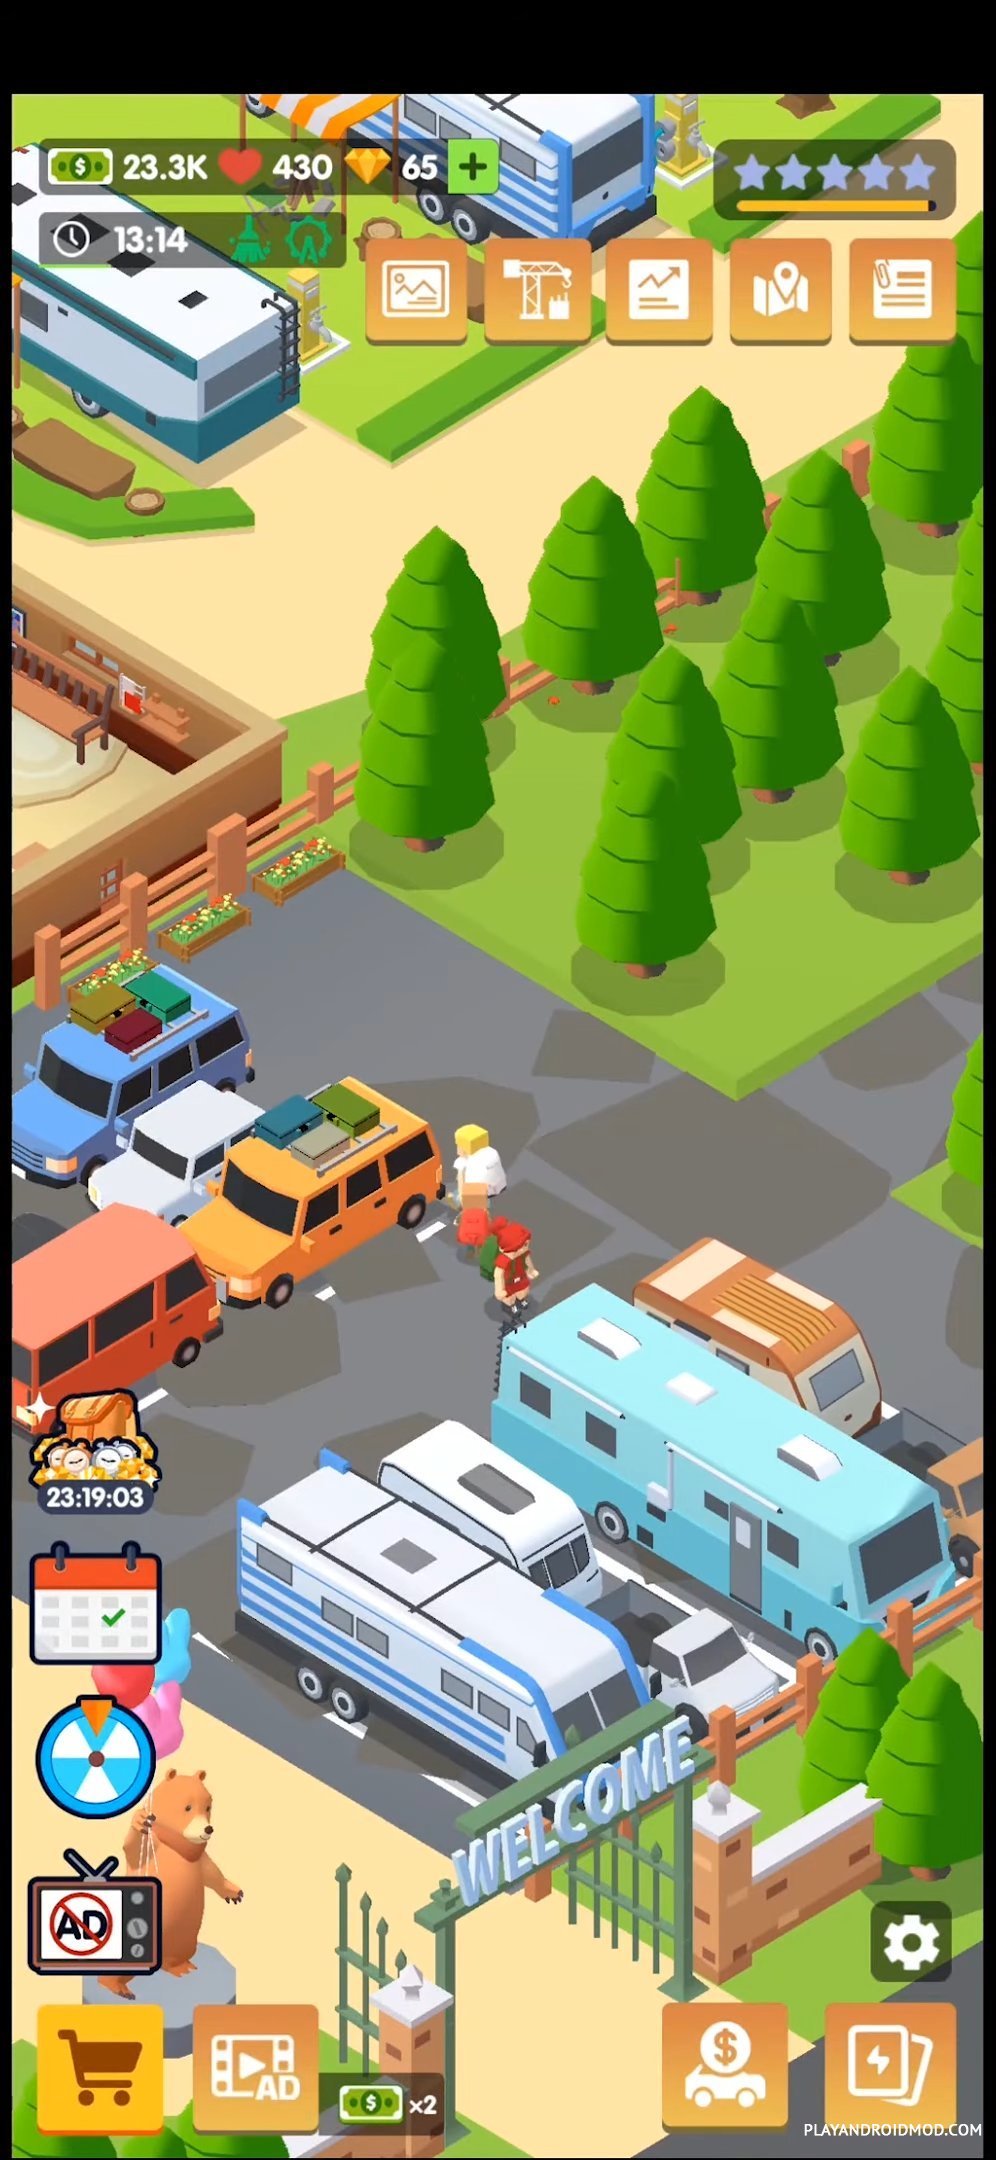 Camp tycoon. Camping Tycoon. Family Town мод много денег и алмазов. БАУМАСТЕР мод много денег и алмазов последняя версия.